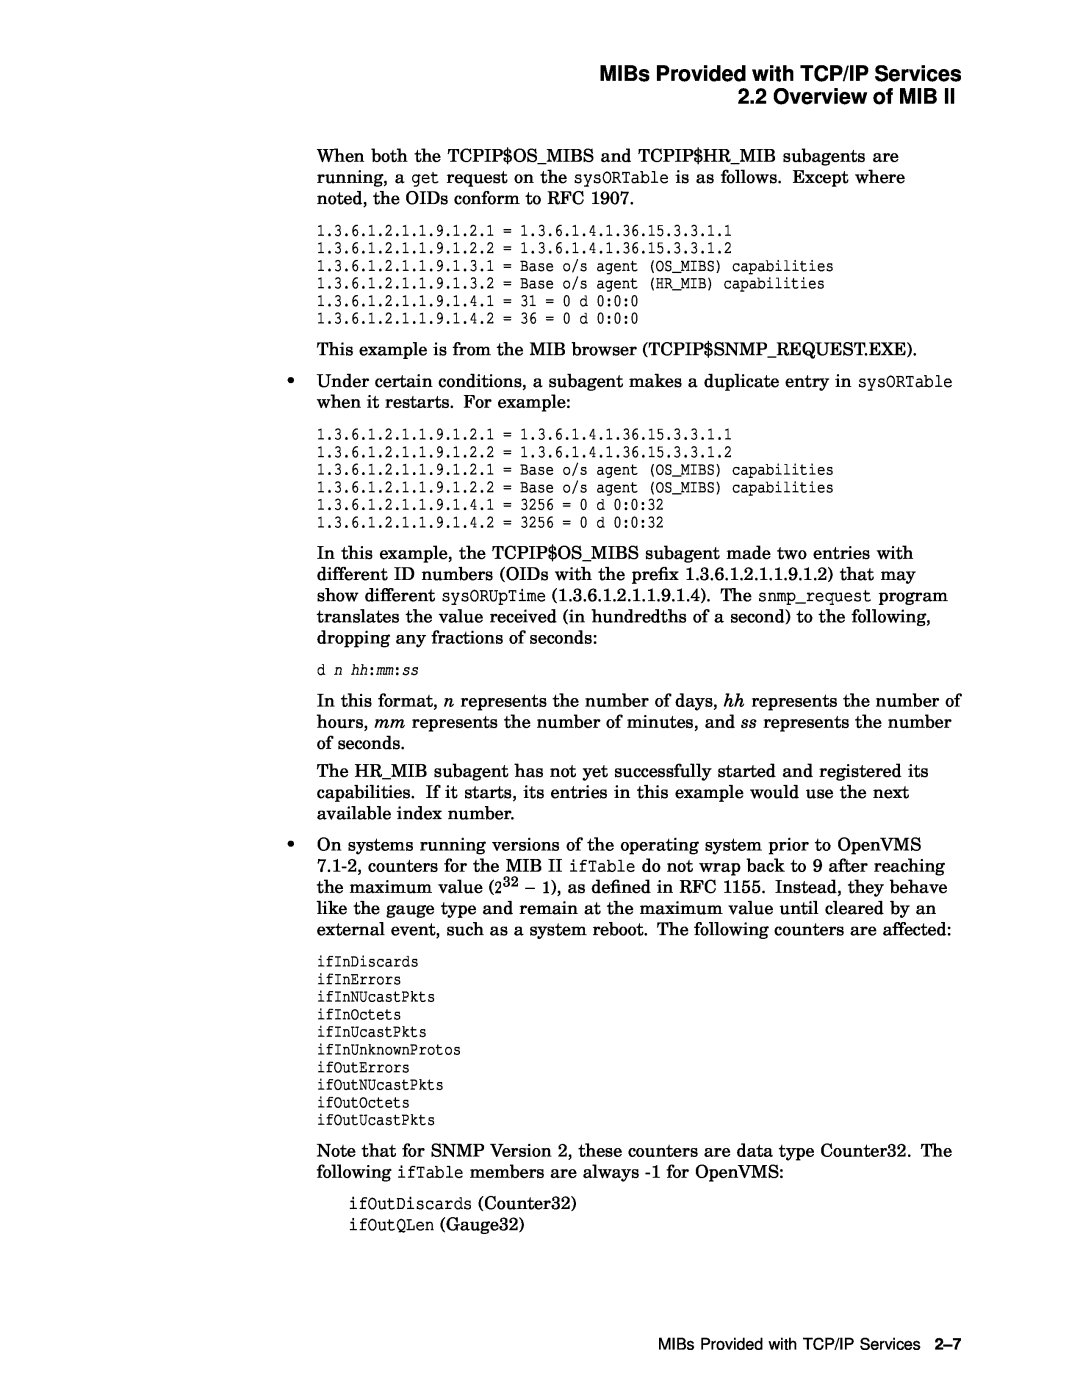 Compaq AAR04BCTE manual MIBs Provided with TCP/IP Services 2.2 Overview of MIB, ifOutDiscards Counter32 ifOutQLen Gauge32 